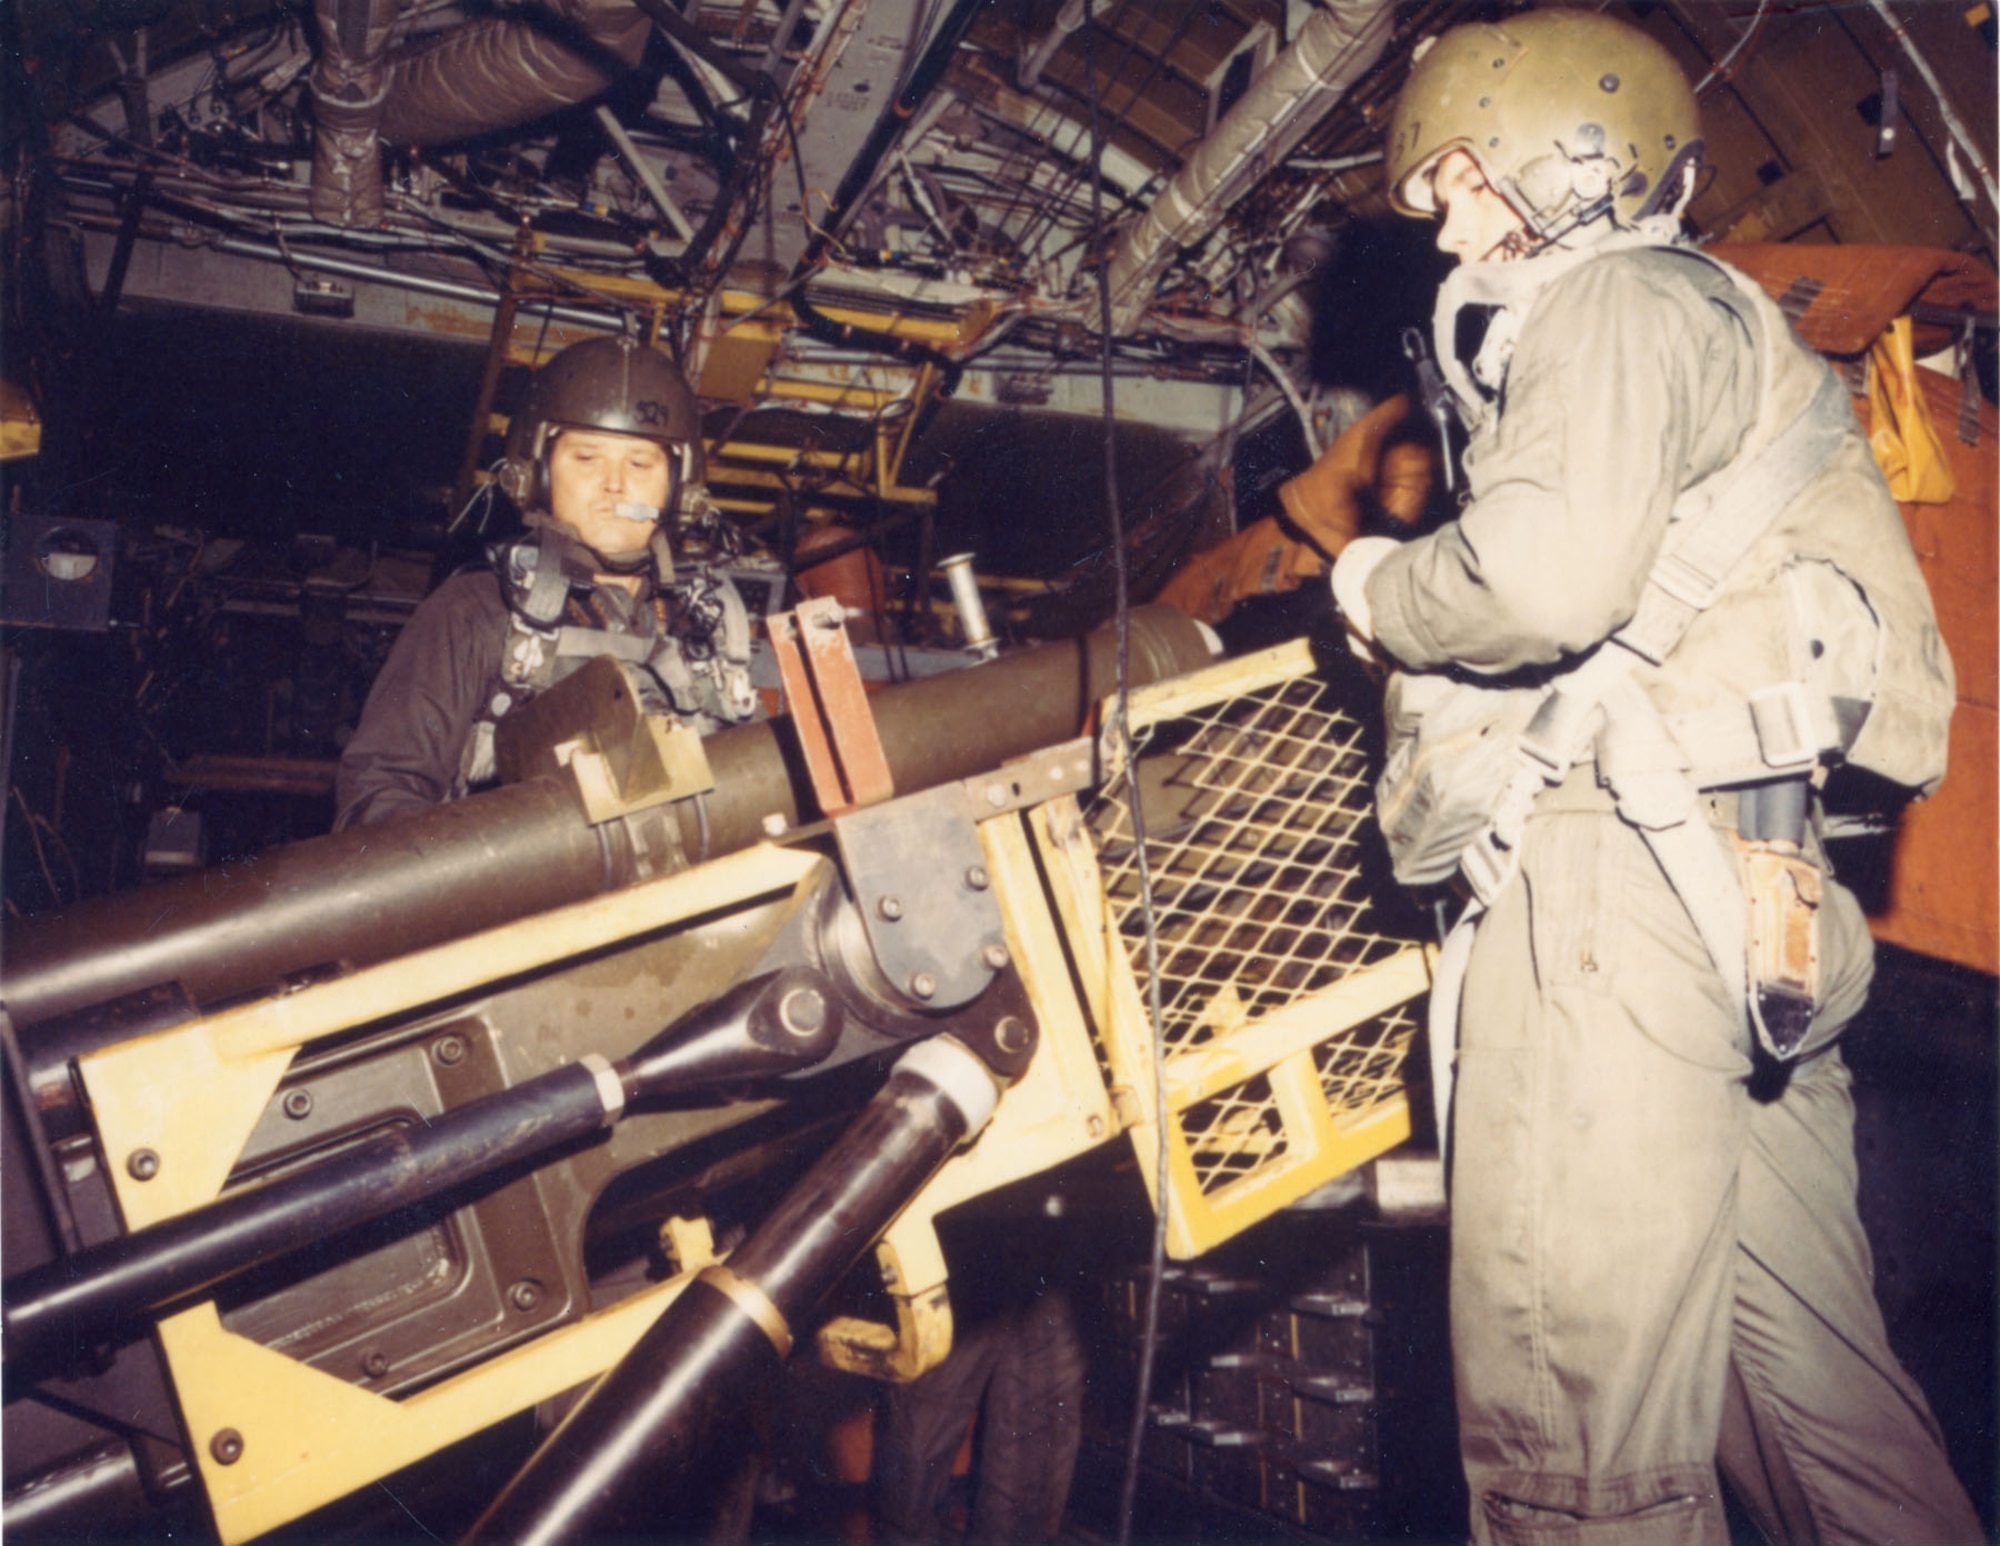 Master Sgt. Jacob Mercer (left) prepares to load a AC-130 Spectre 105mm howitzer. Mercer was one of the crewmembers killed on June 18, 1972. (U.S. Air Force photo)